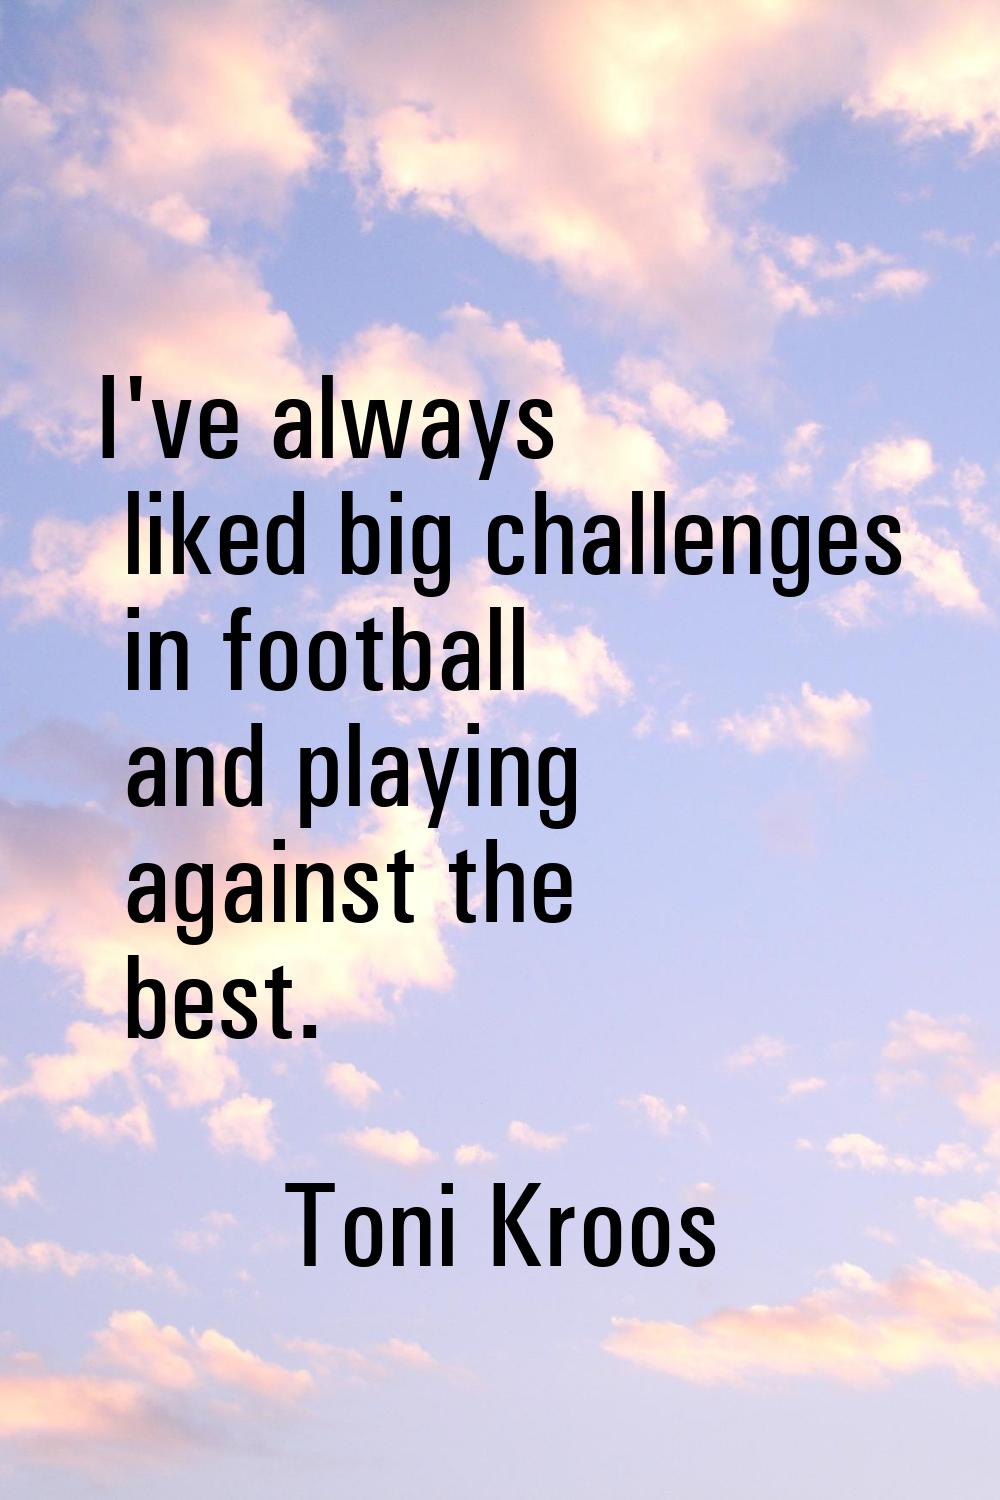 I've always liked big challenges in football and playing against the best.